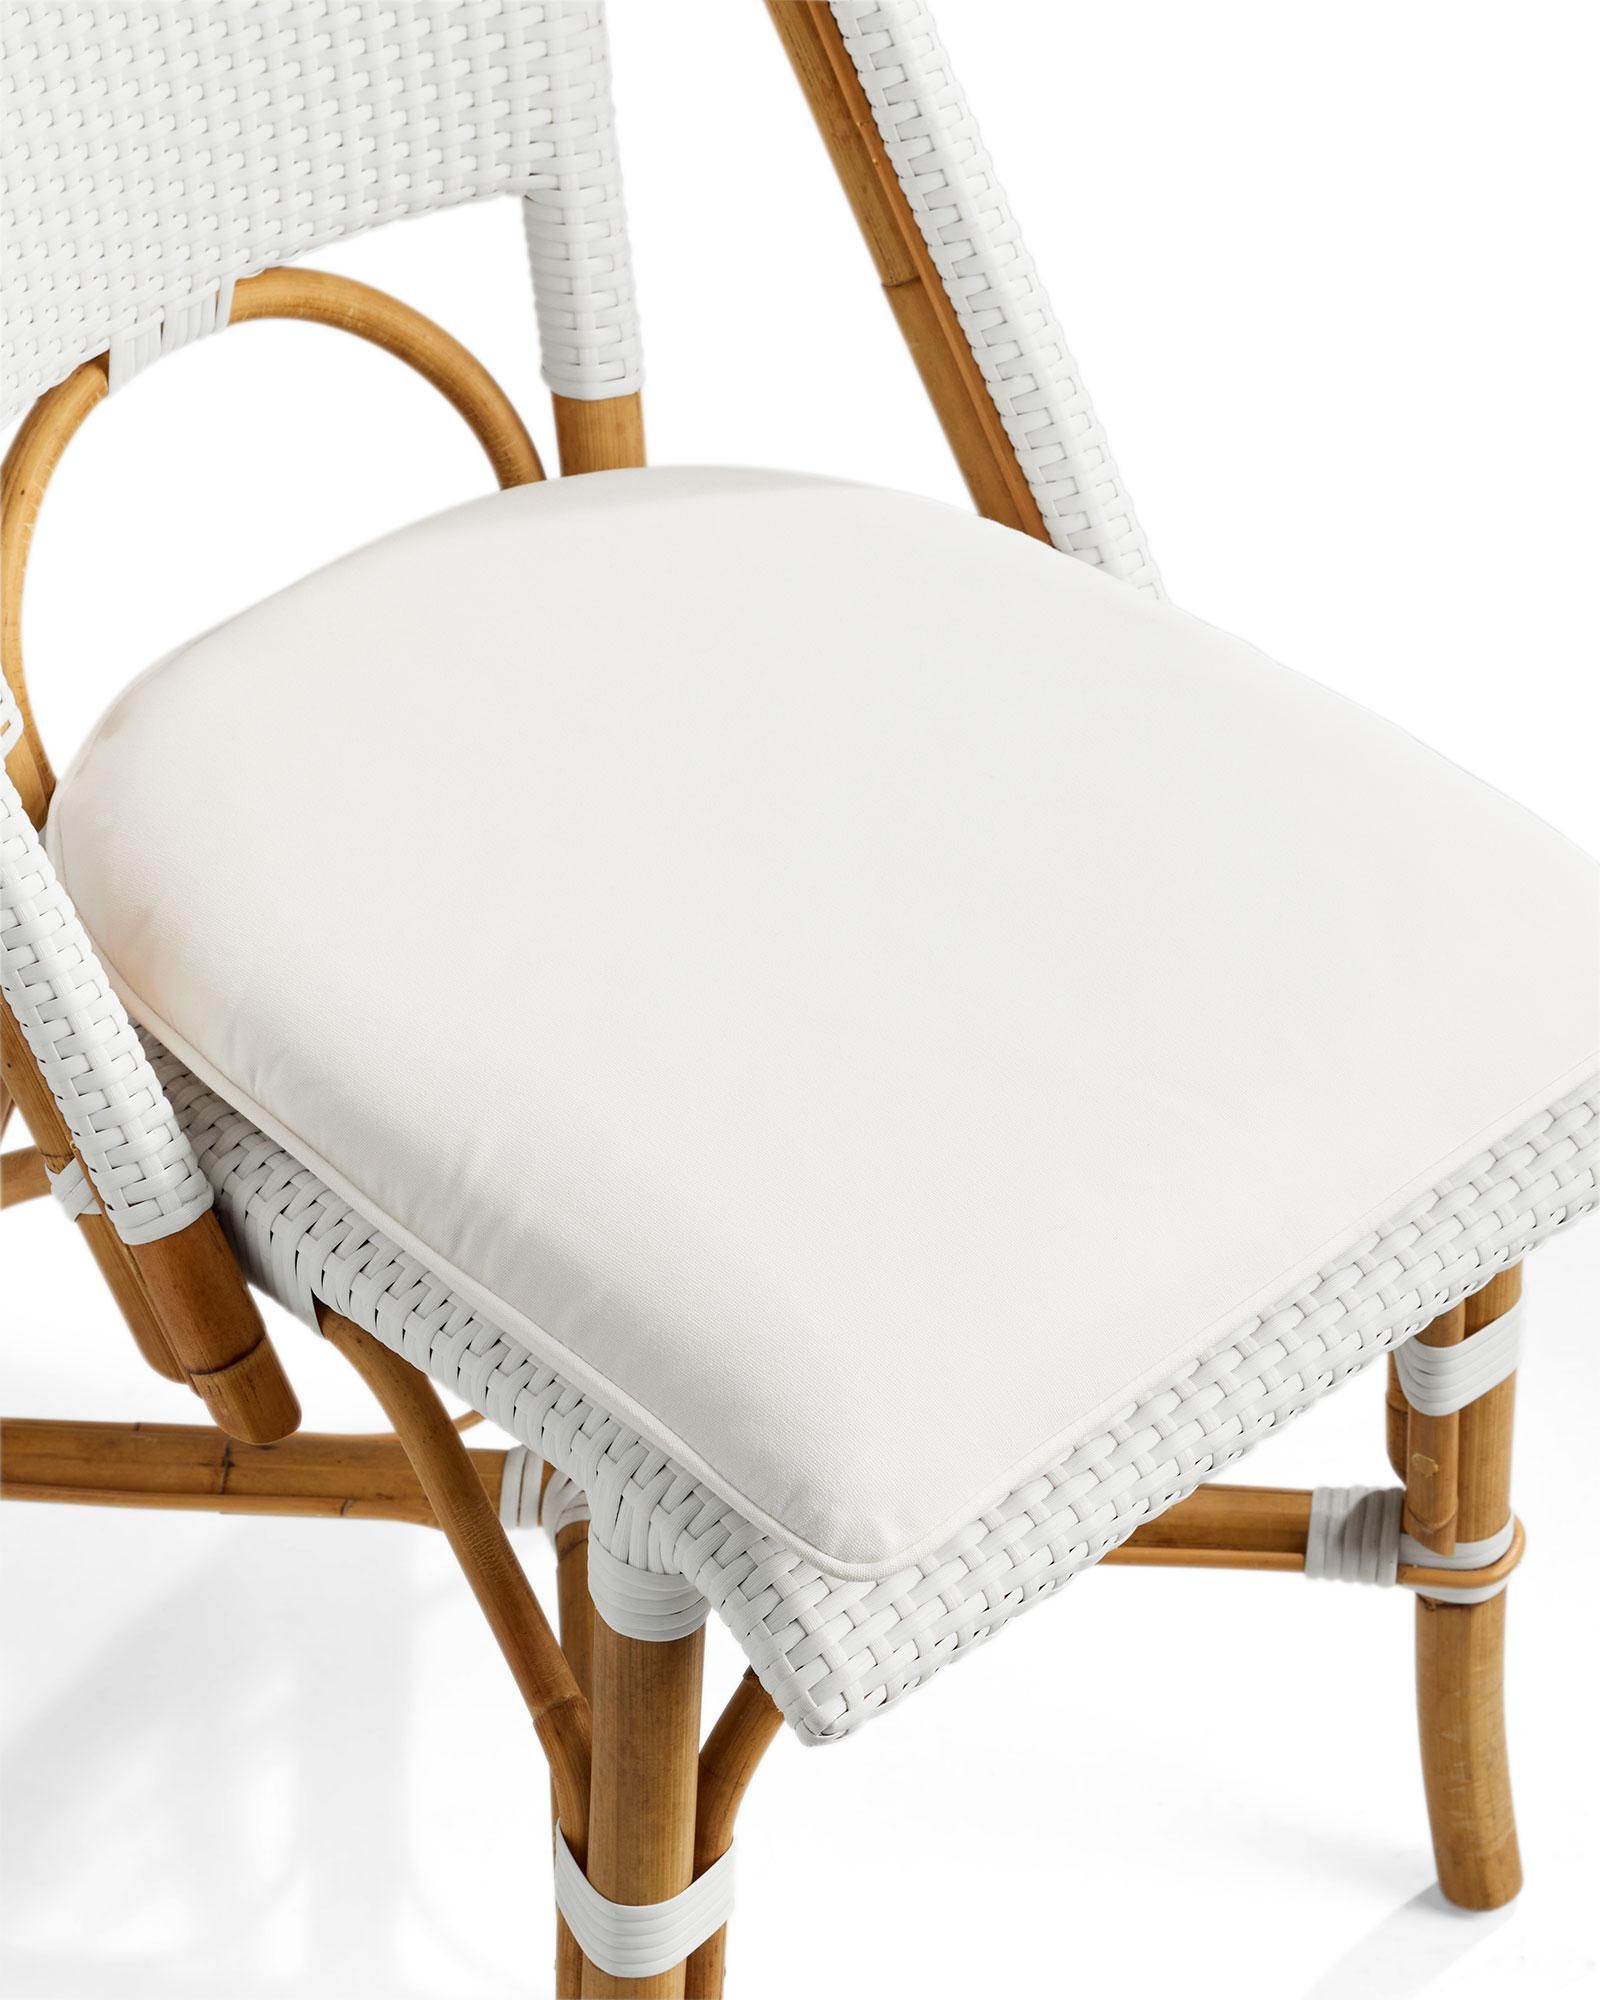 Riviera Dining Chair Cushion | Serena and Lily